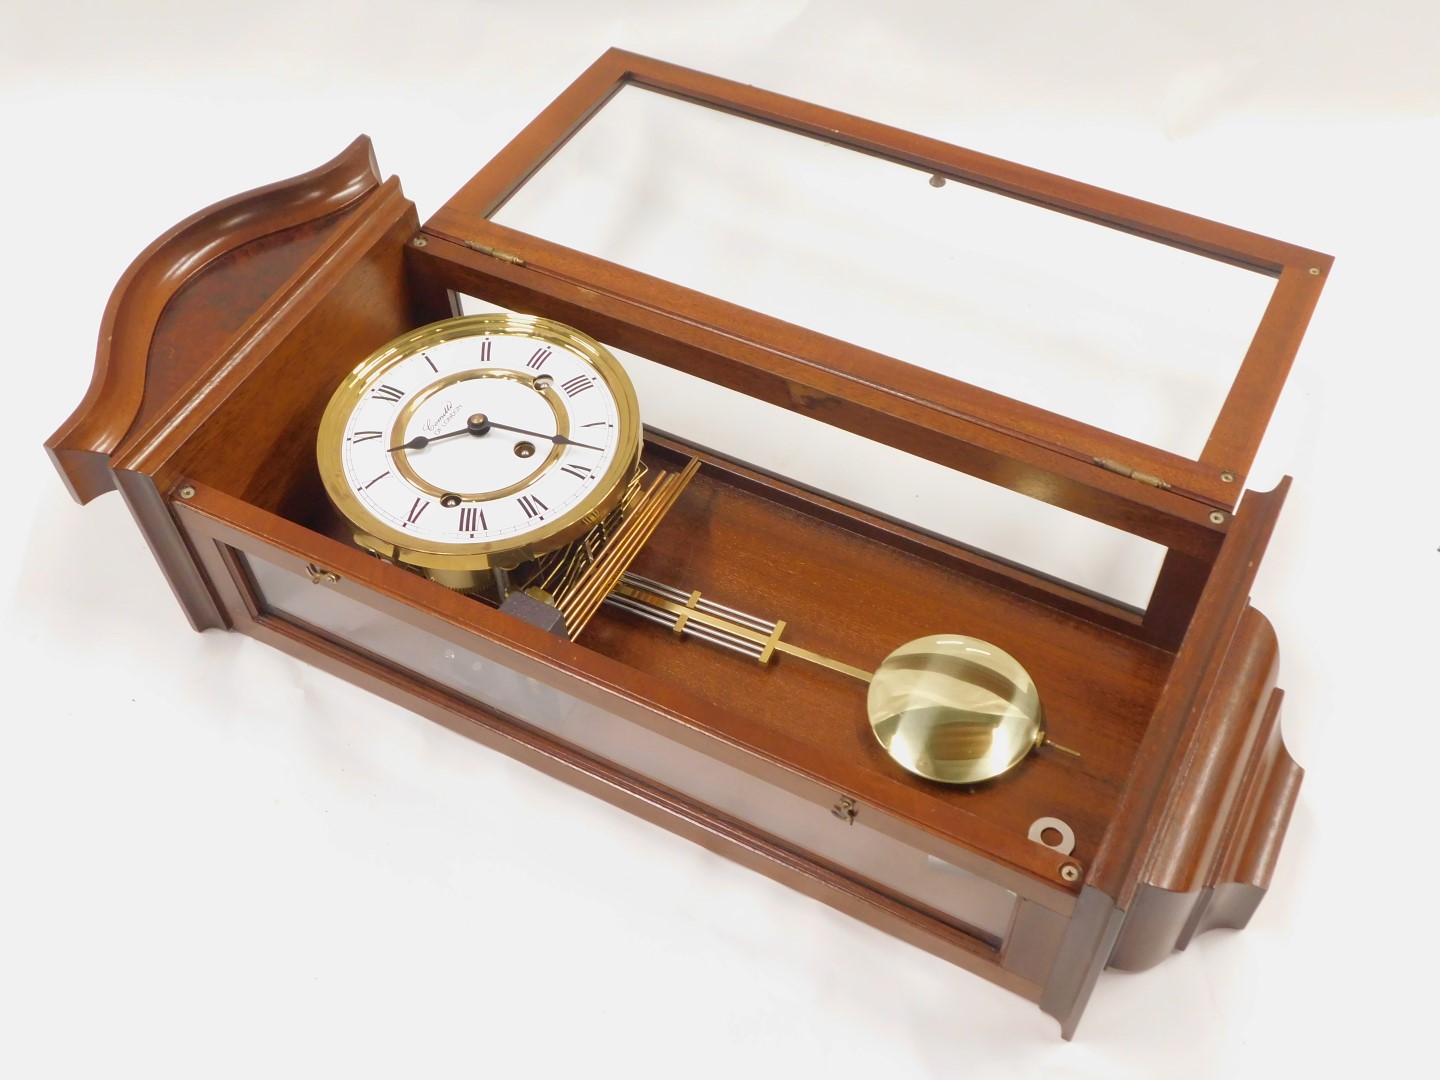 A Committee of London mahogany cased drop dial wall clock, with a white enamel Roman numeric dial, a - Image 3 of 4